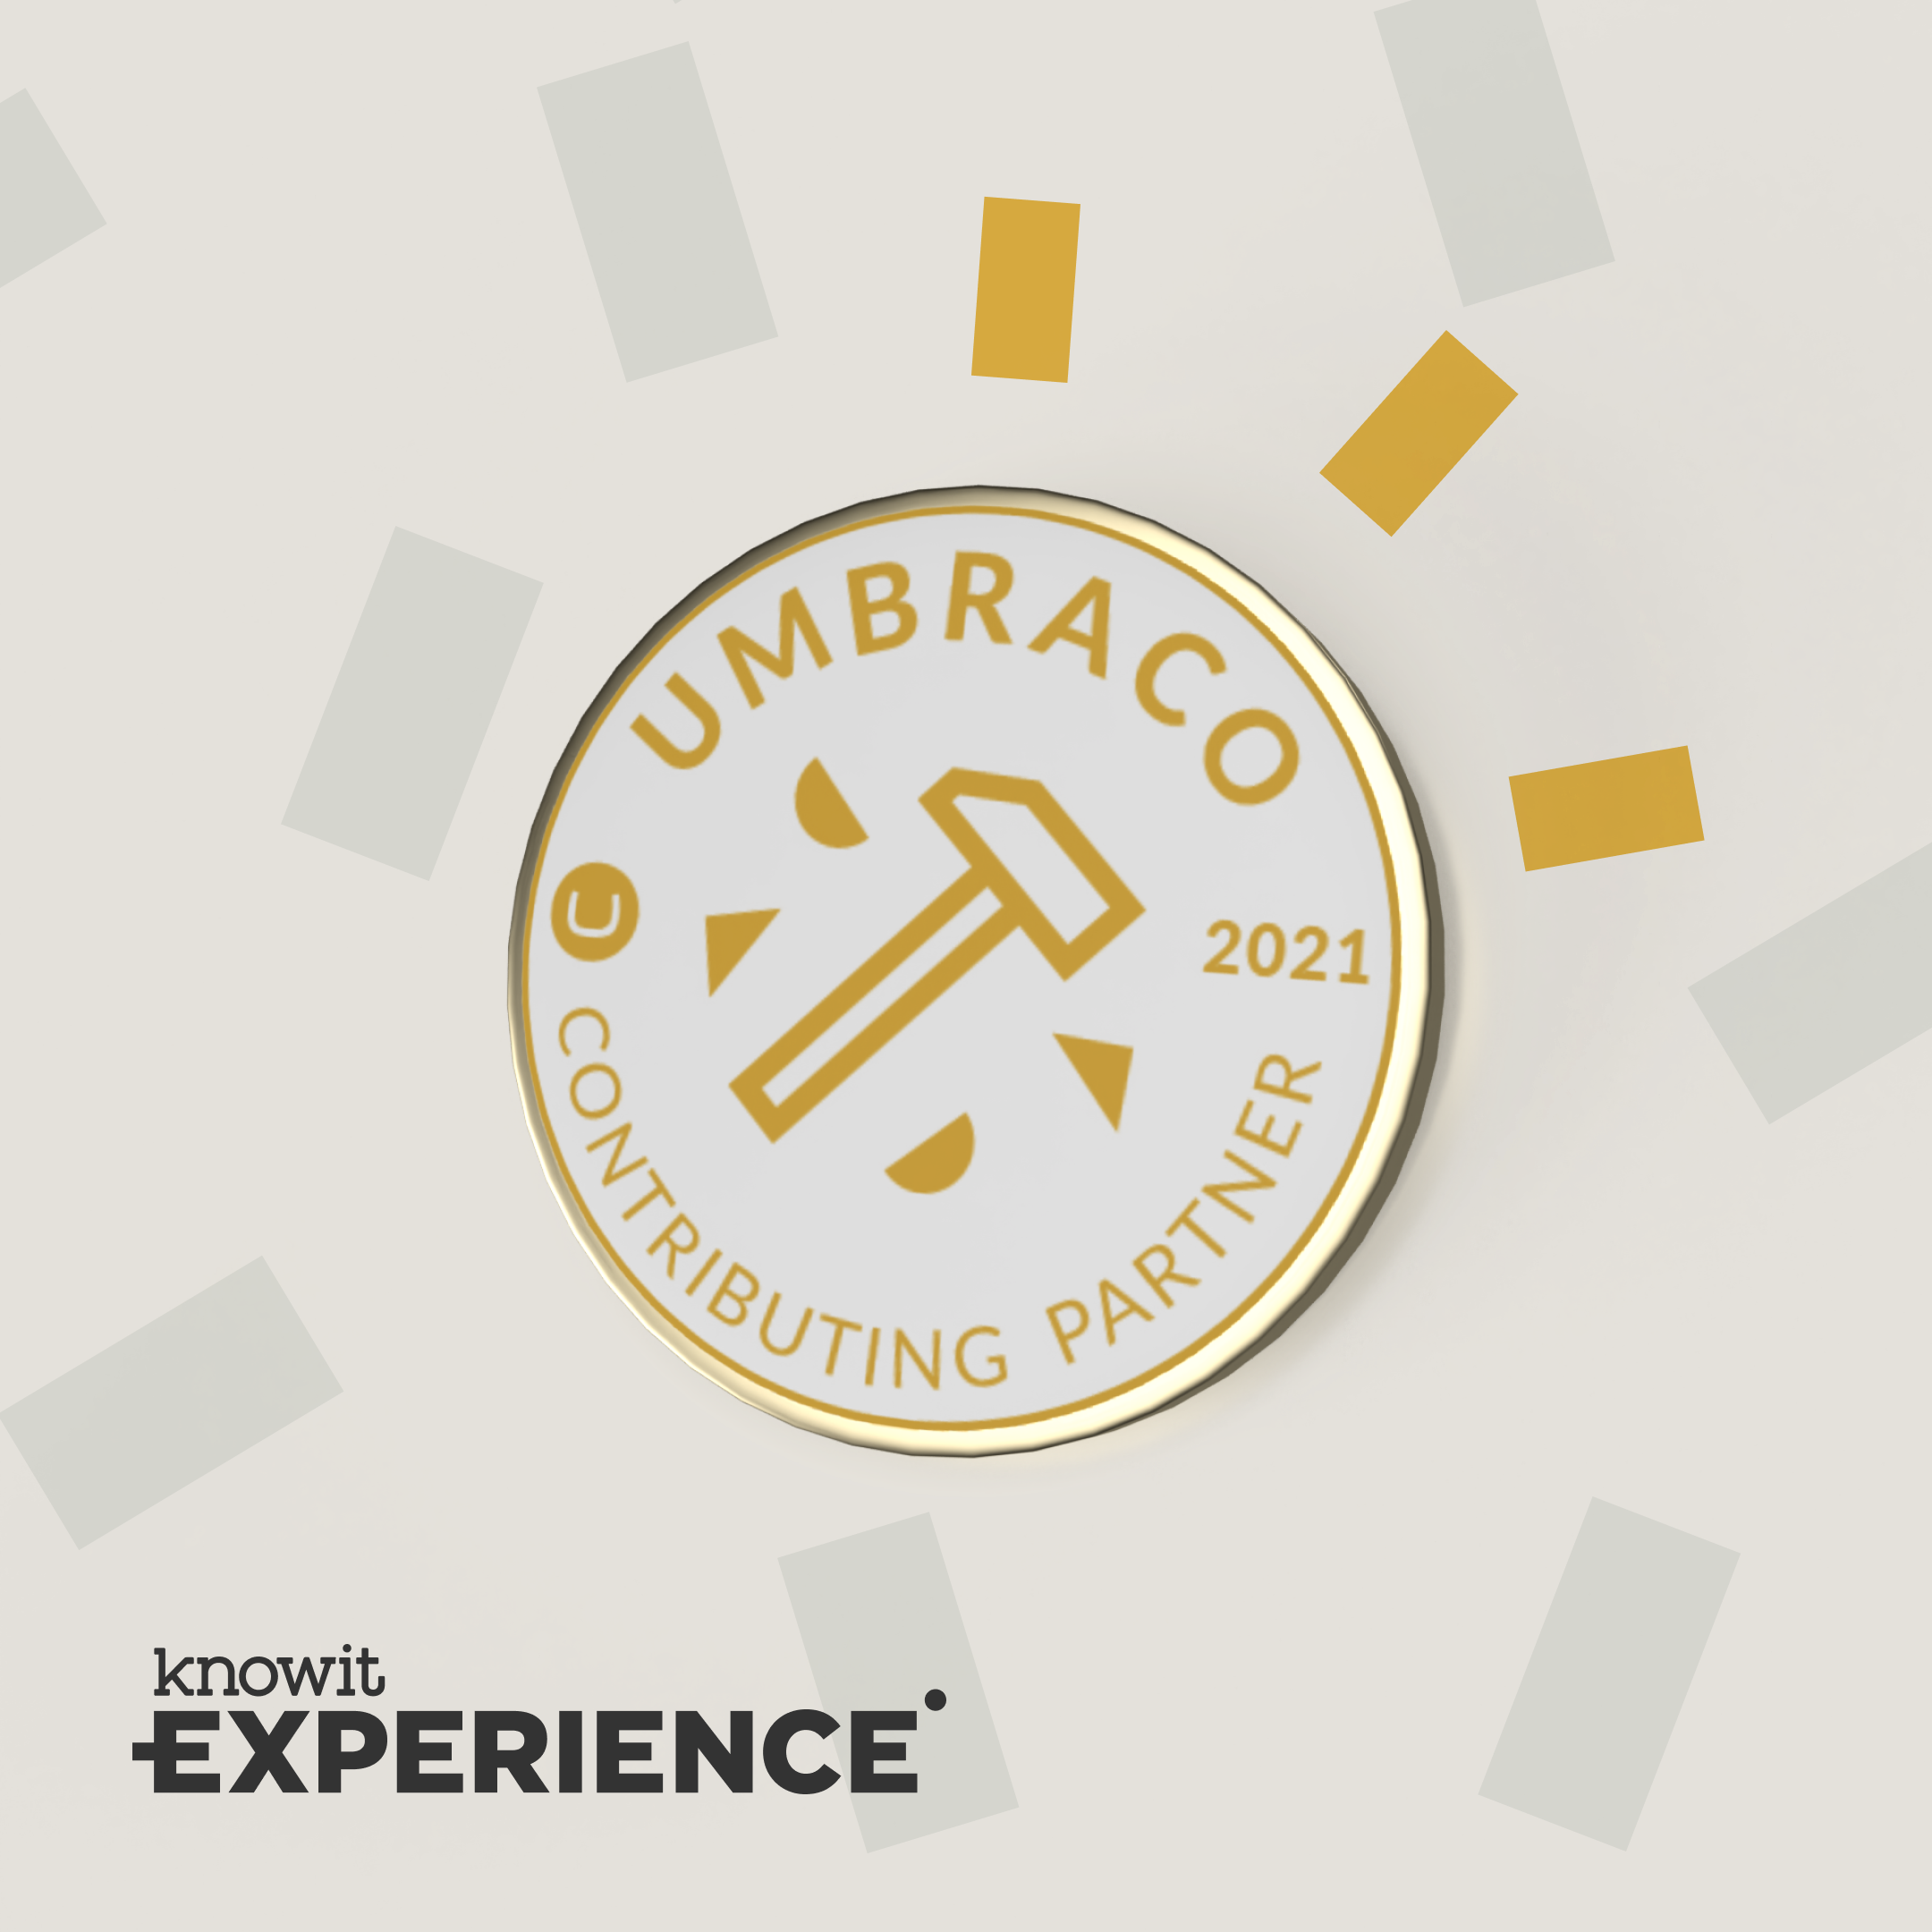 Knowit Experience becomes Umbraco Contributing Gold Partner 2021